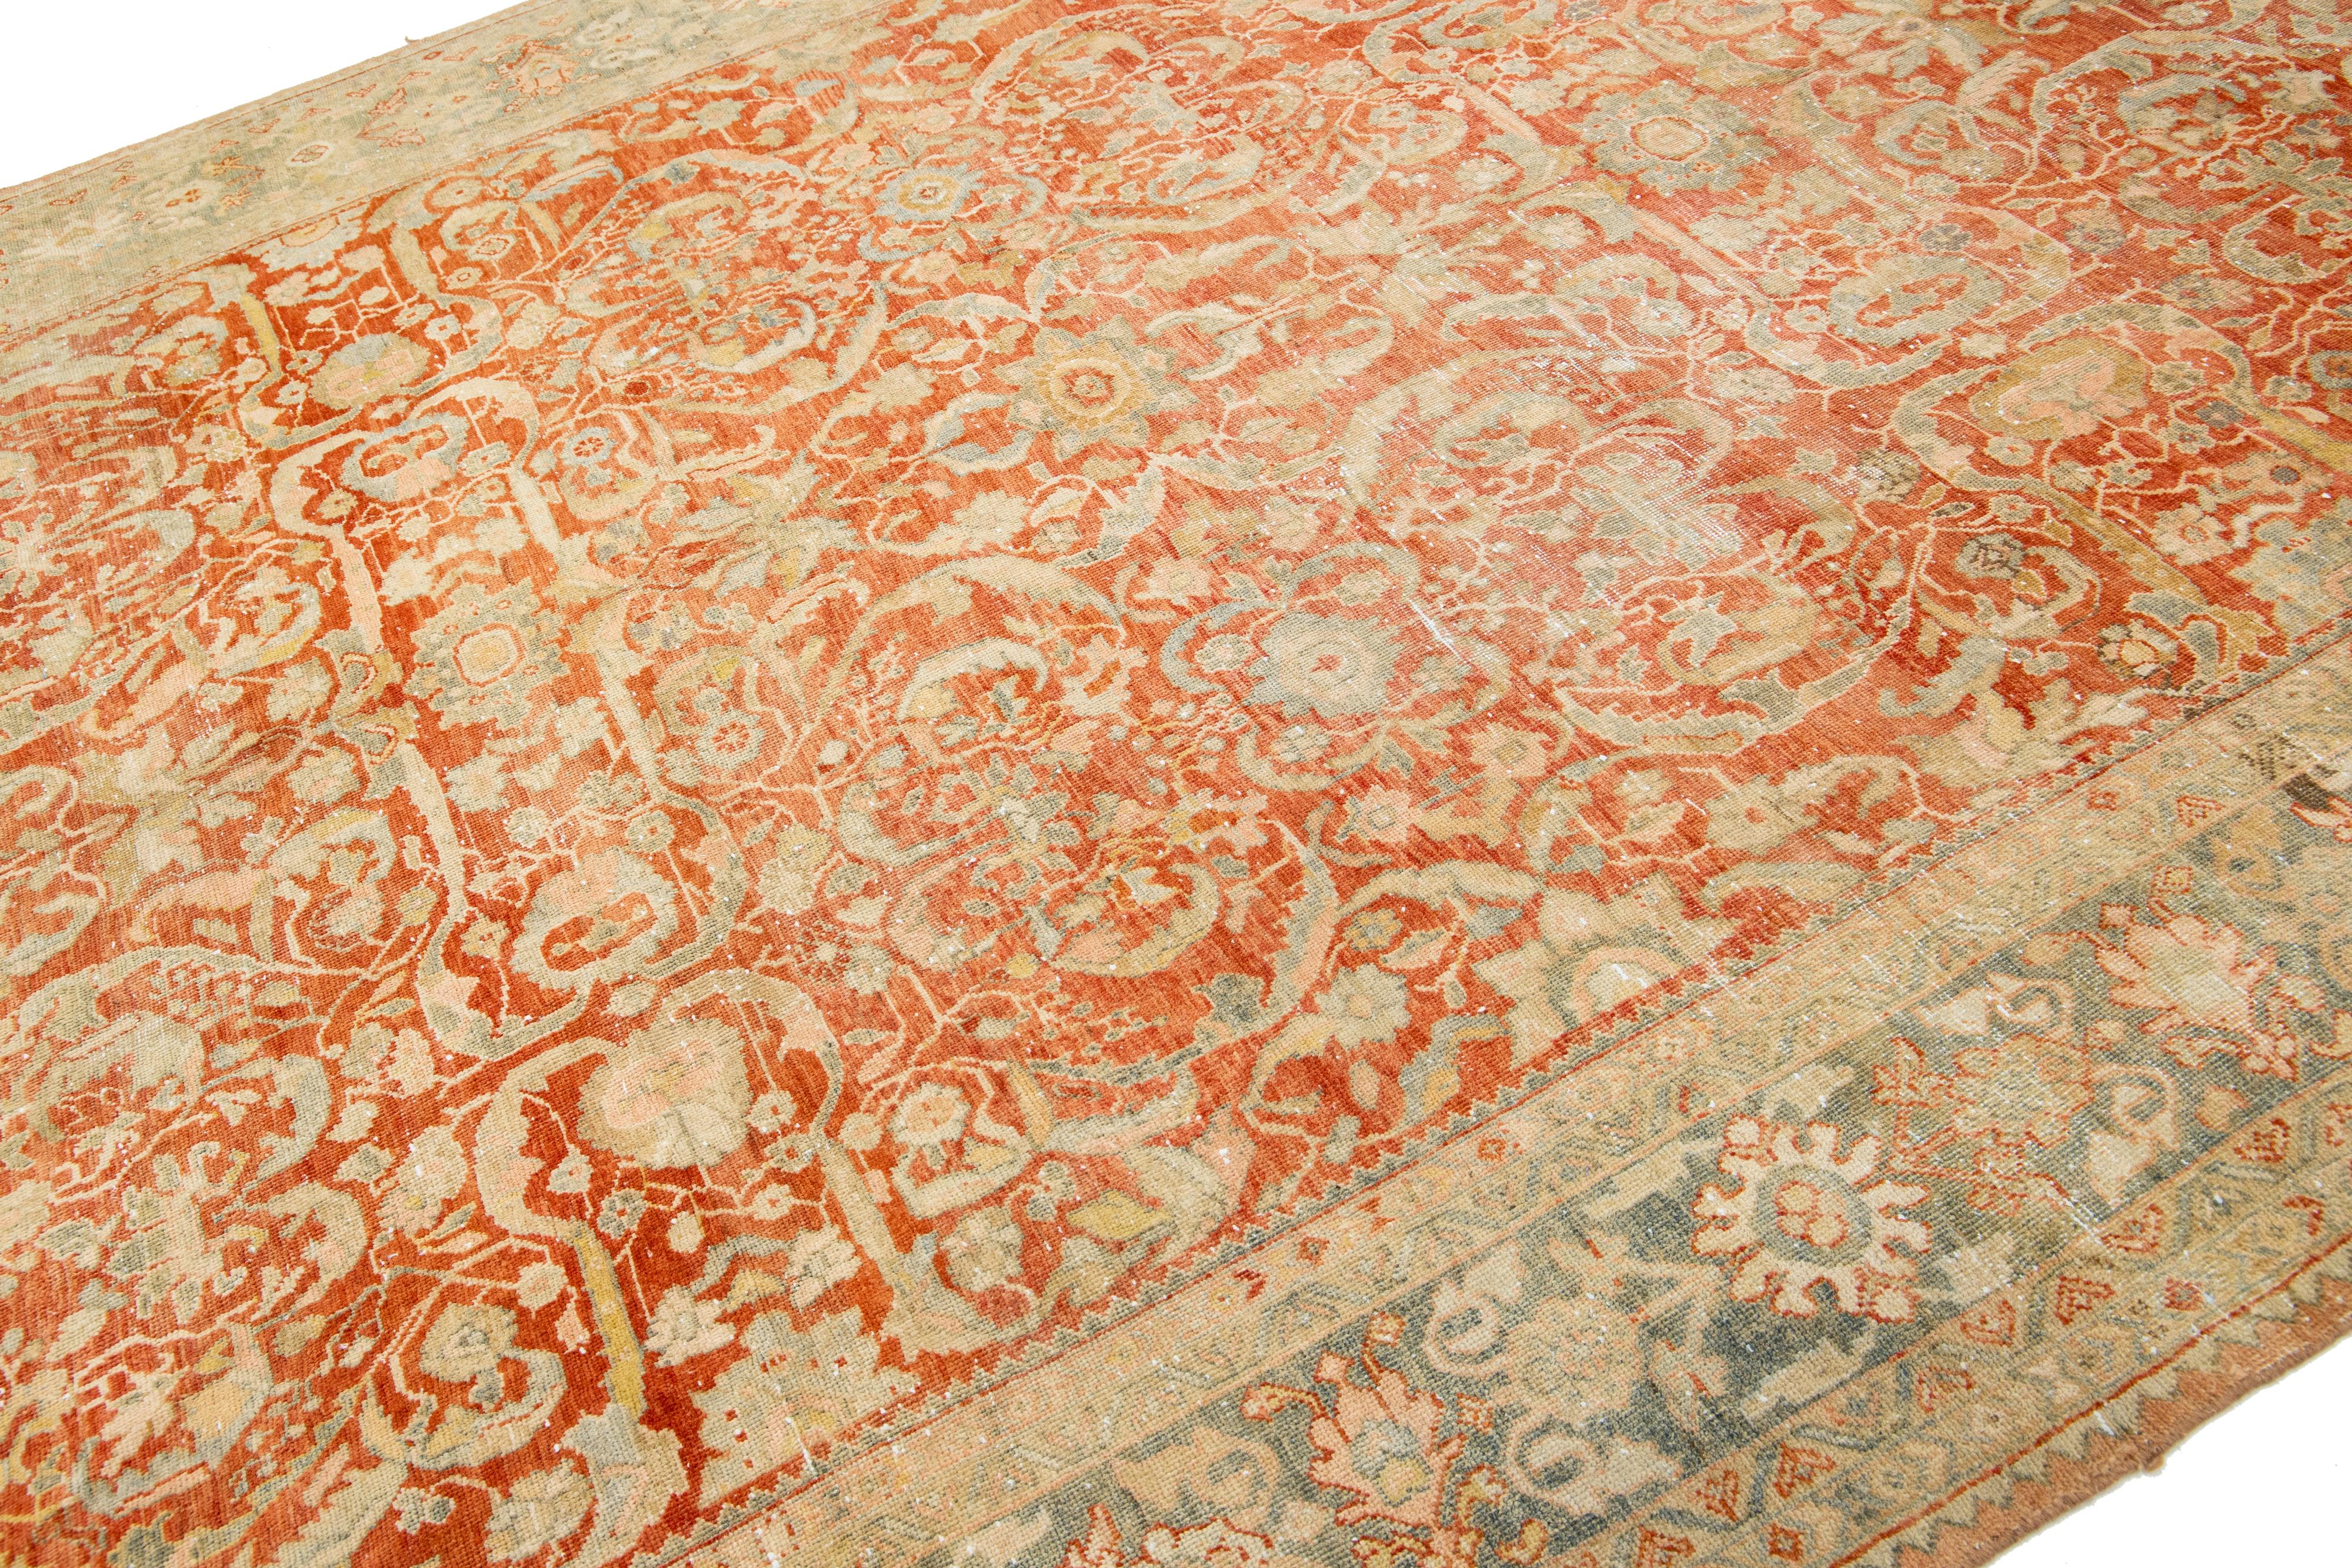 1920s Antique Persian Heriz Wool Rug In Rust With Allover Floral Design  For Sale 1